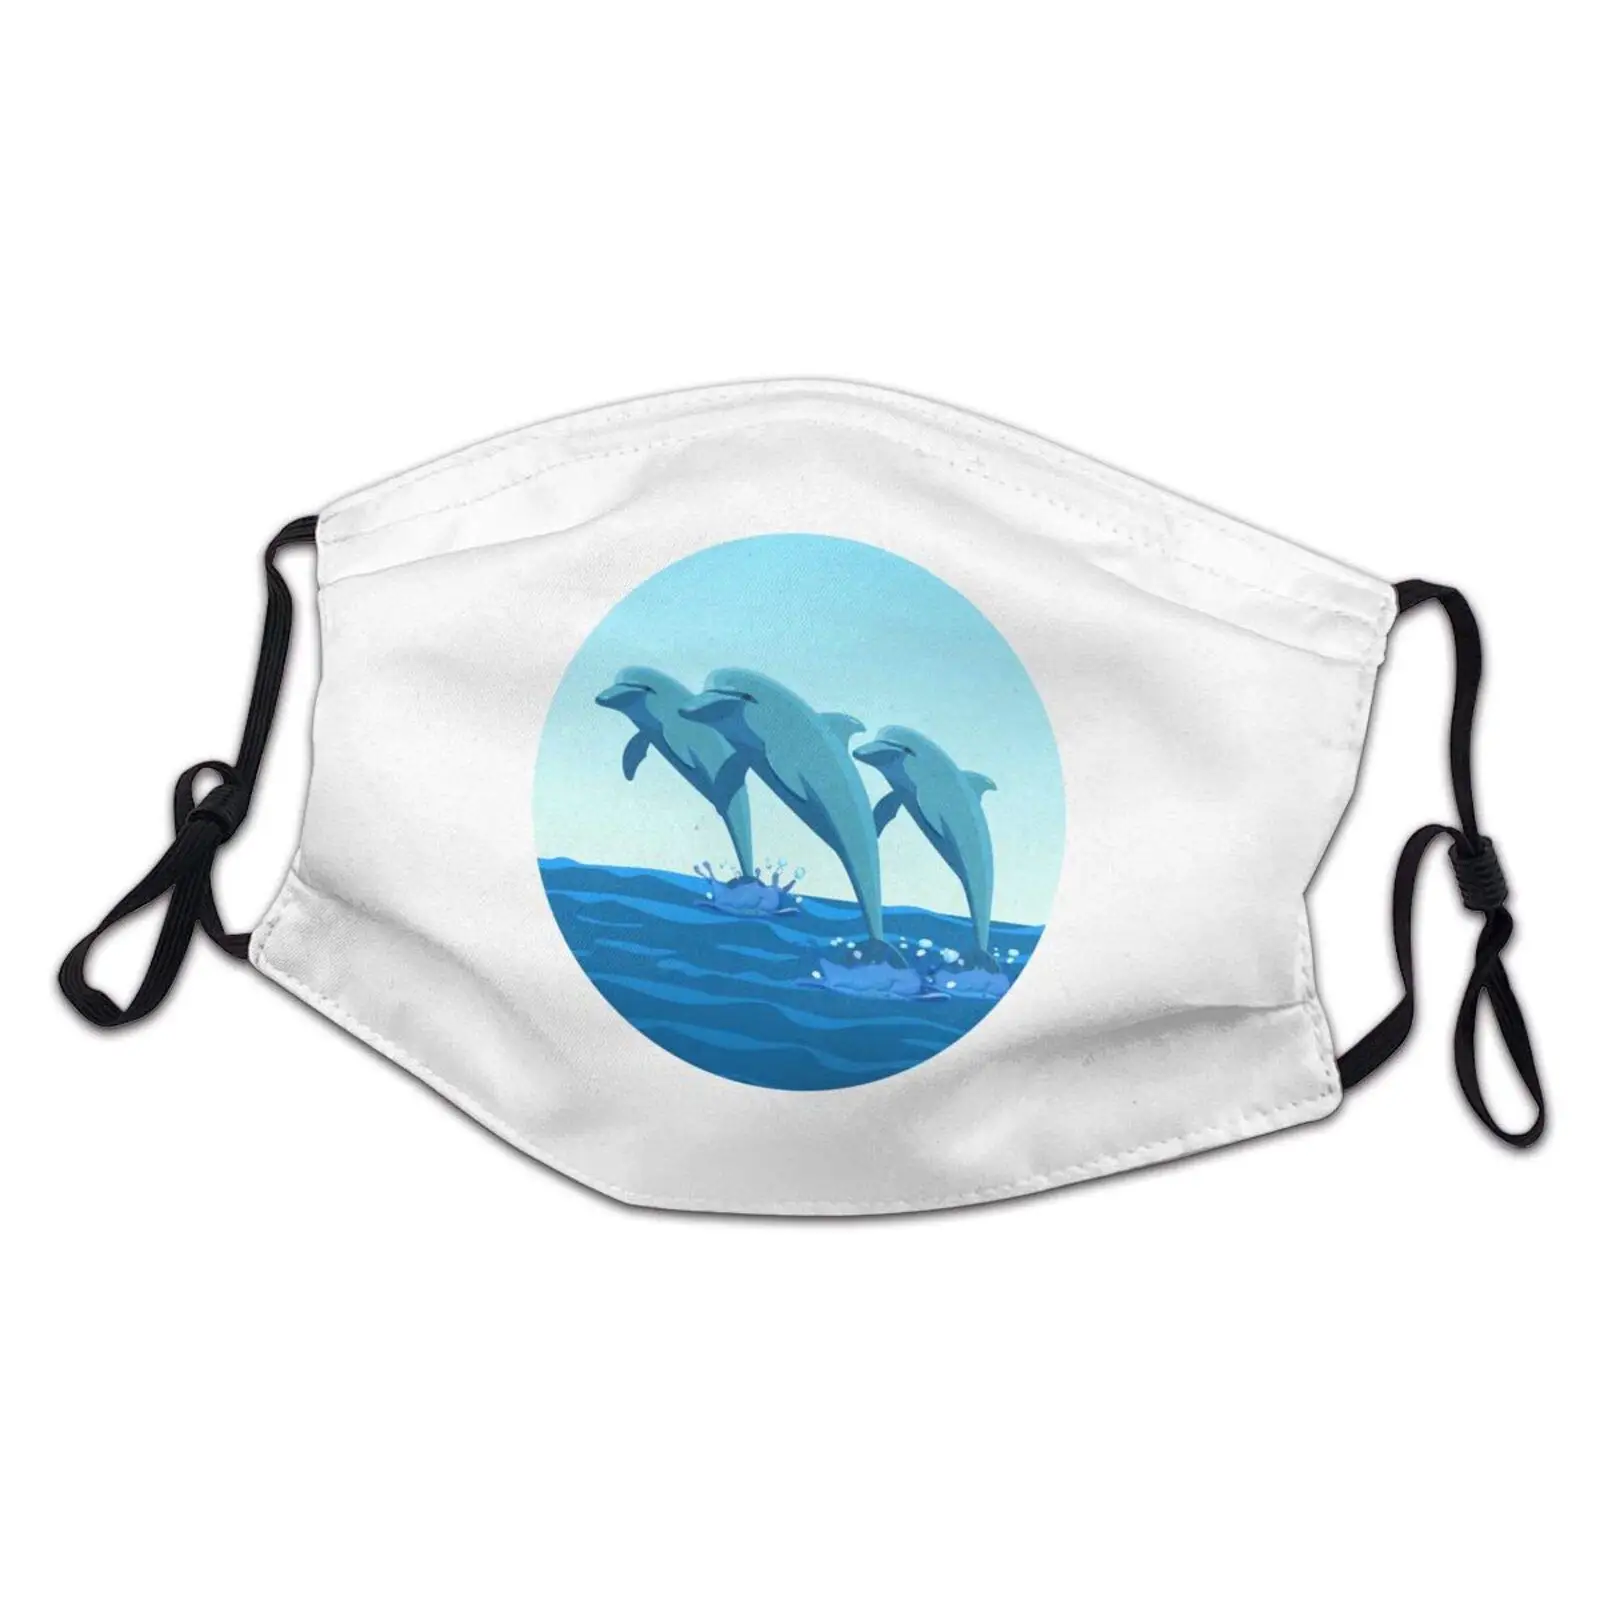 

Three Battle Nose Dolphins Jumping Out of The Water Animal Kids Face Mask Washable Reusable Adjustable Dust Masks Bandanas Black